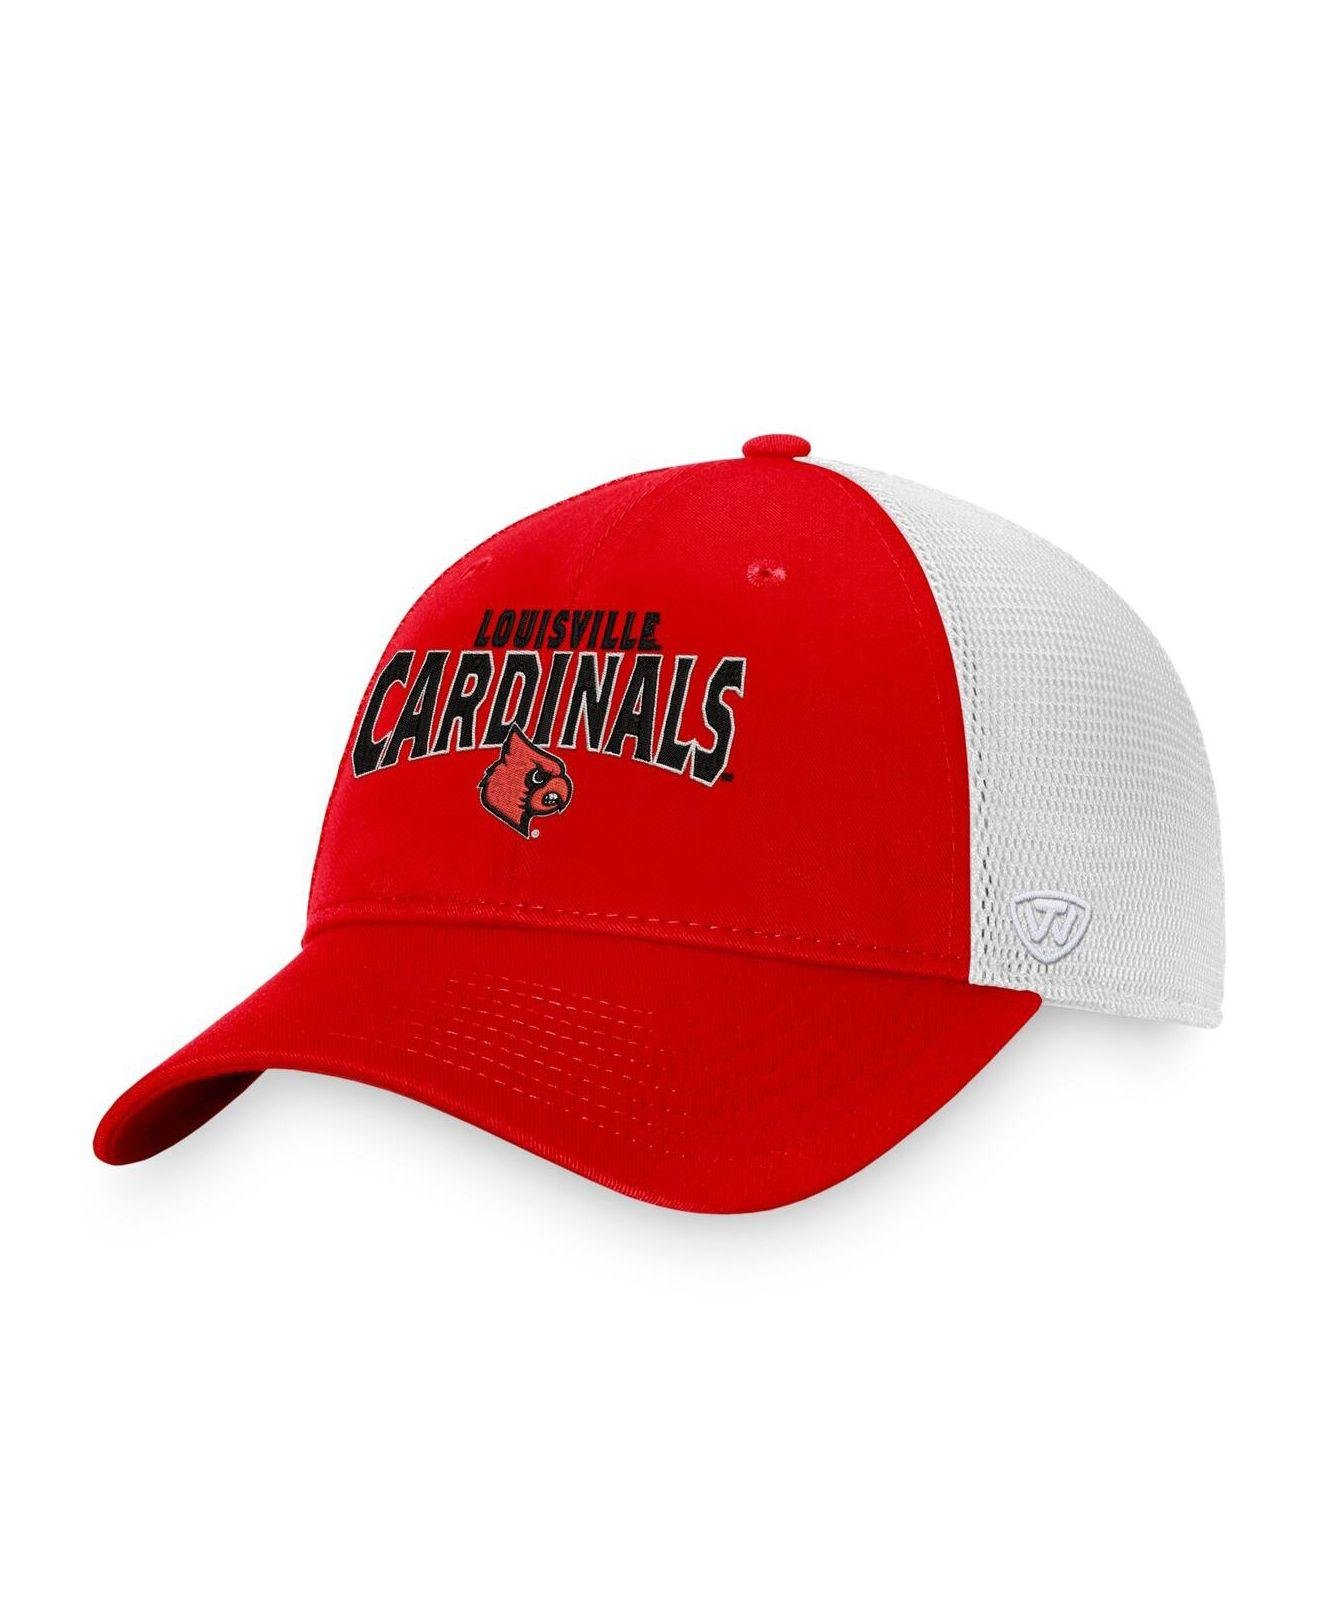 Top Of The World Red, White Louisville Cardinals Breakout Trucker